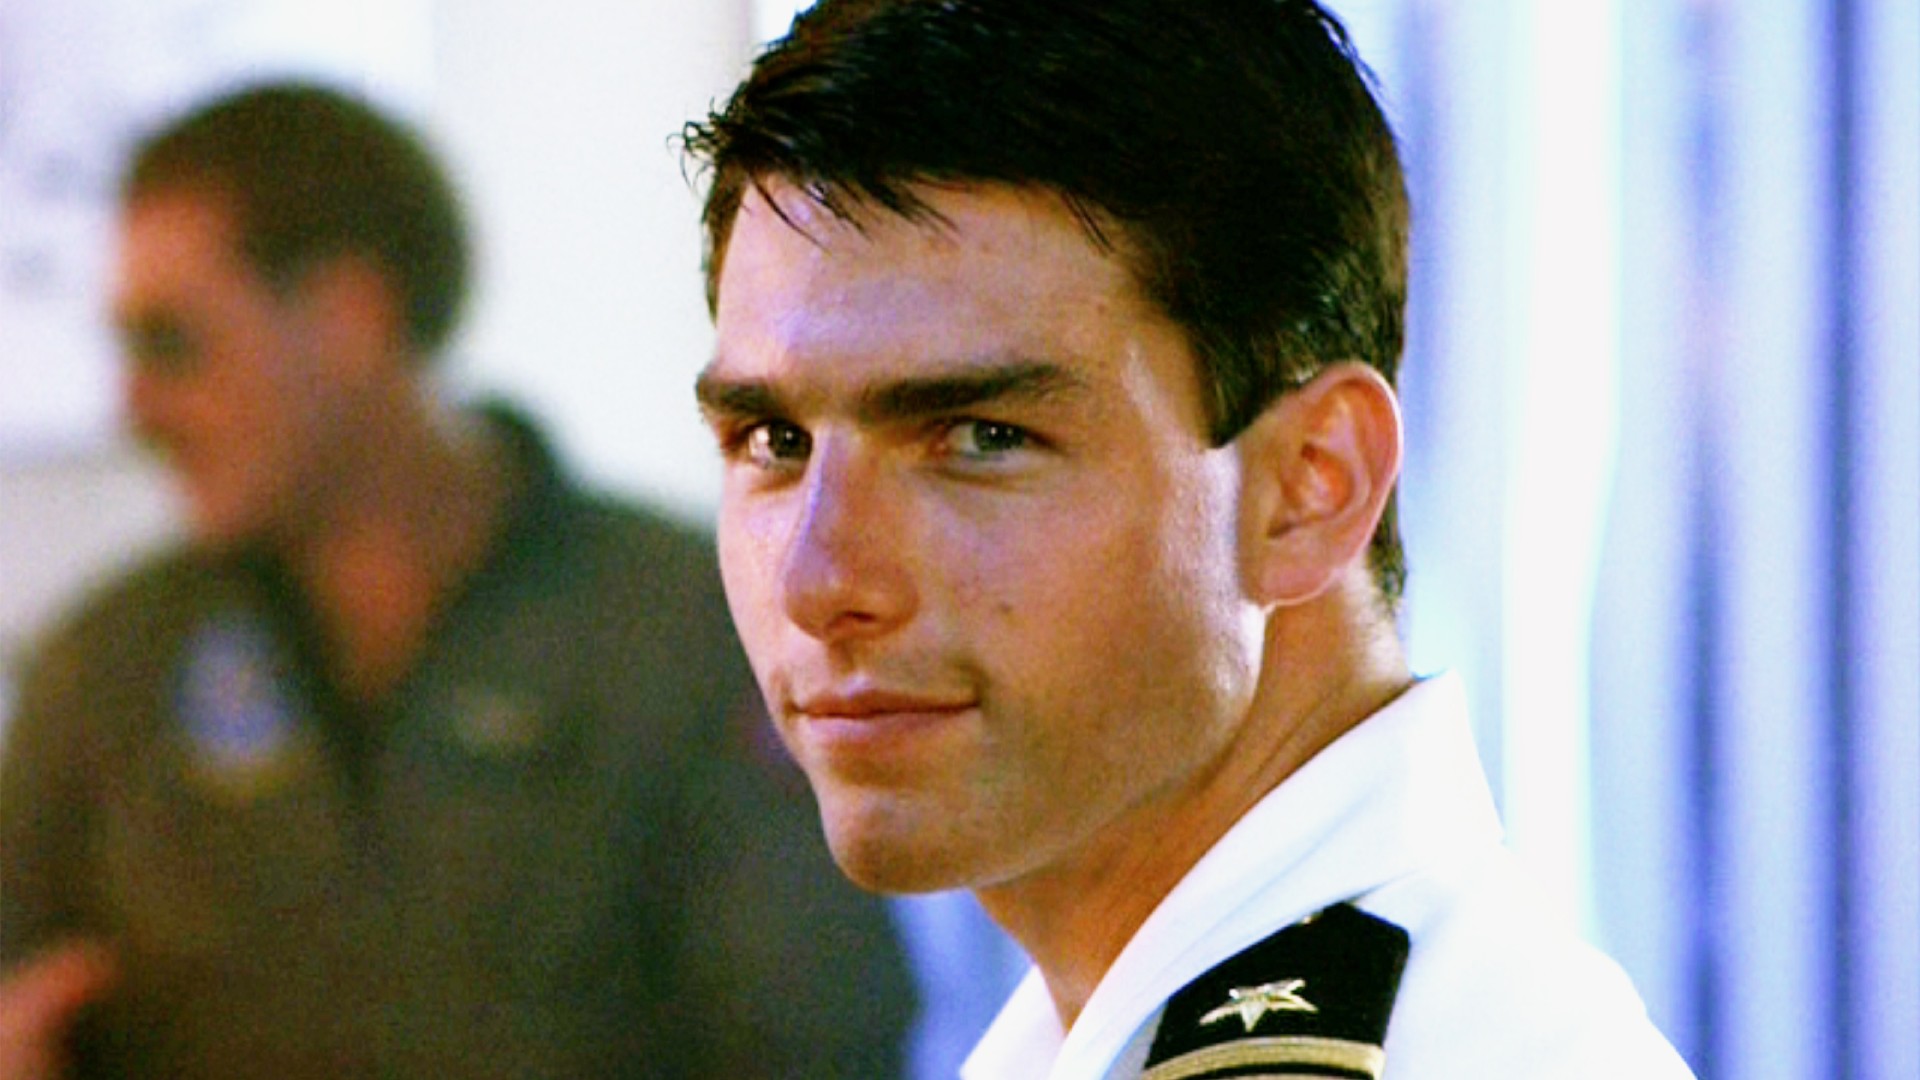 The 1986 film Top Gun saw Tom Cruise star in a fictionalised account of the real US Navy Fighter Weapons School